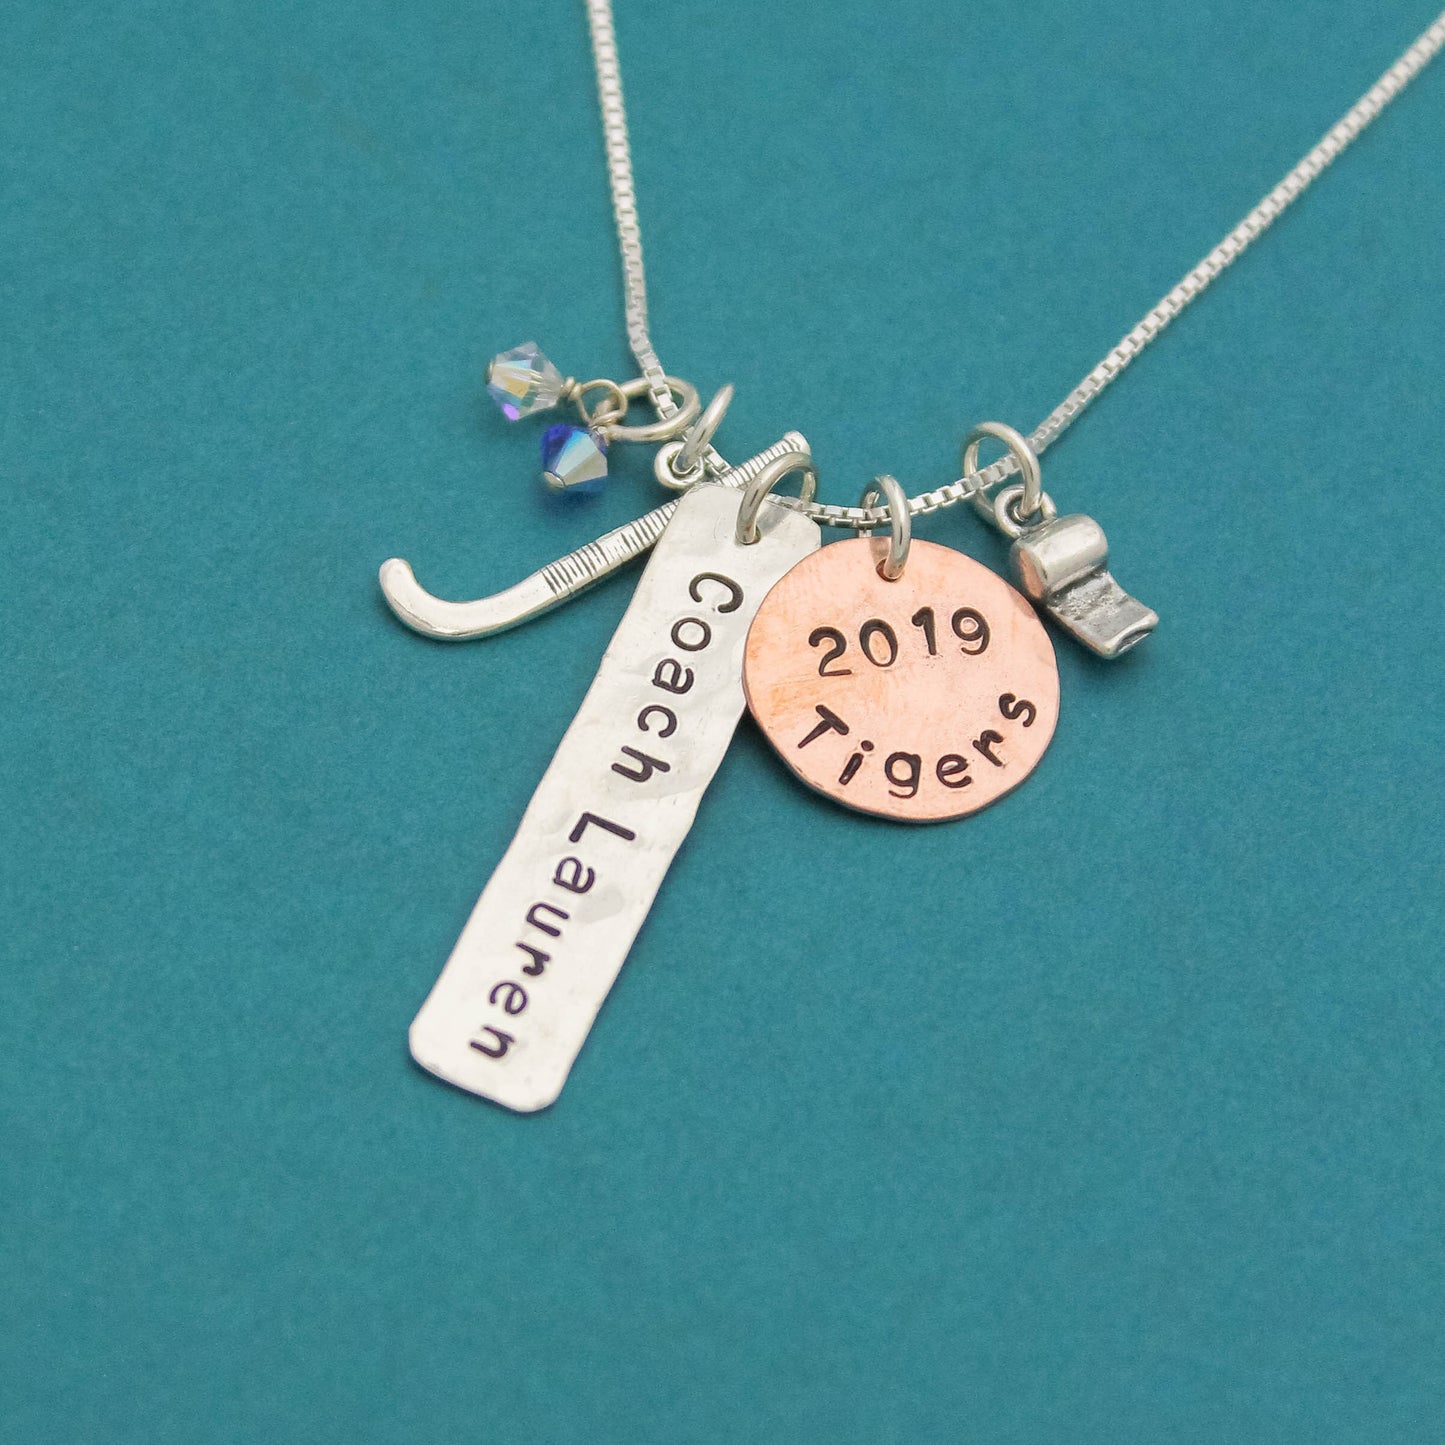 Coach Necklace Choice of Sport Sterling Silver and Copper Customized Hand Stamped Jewelry